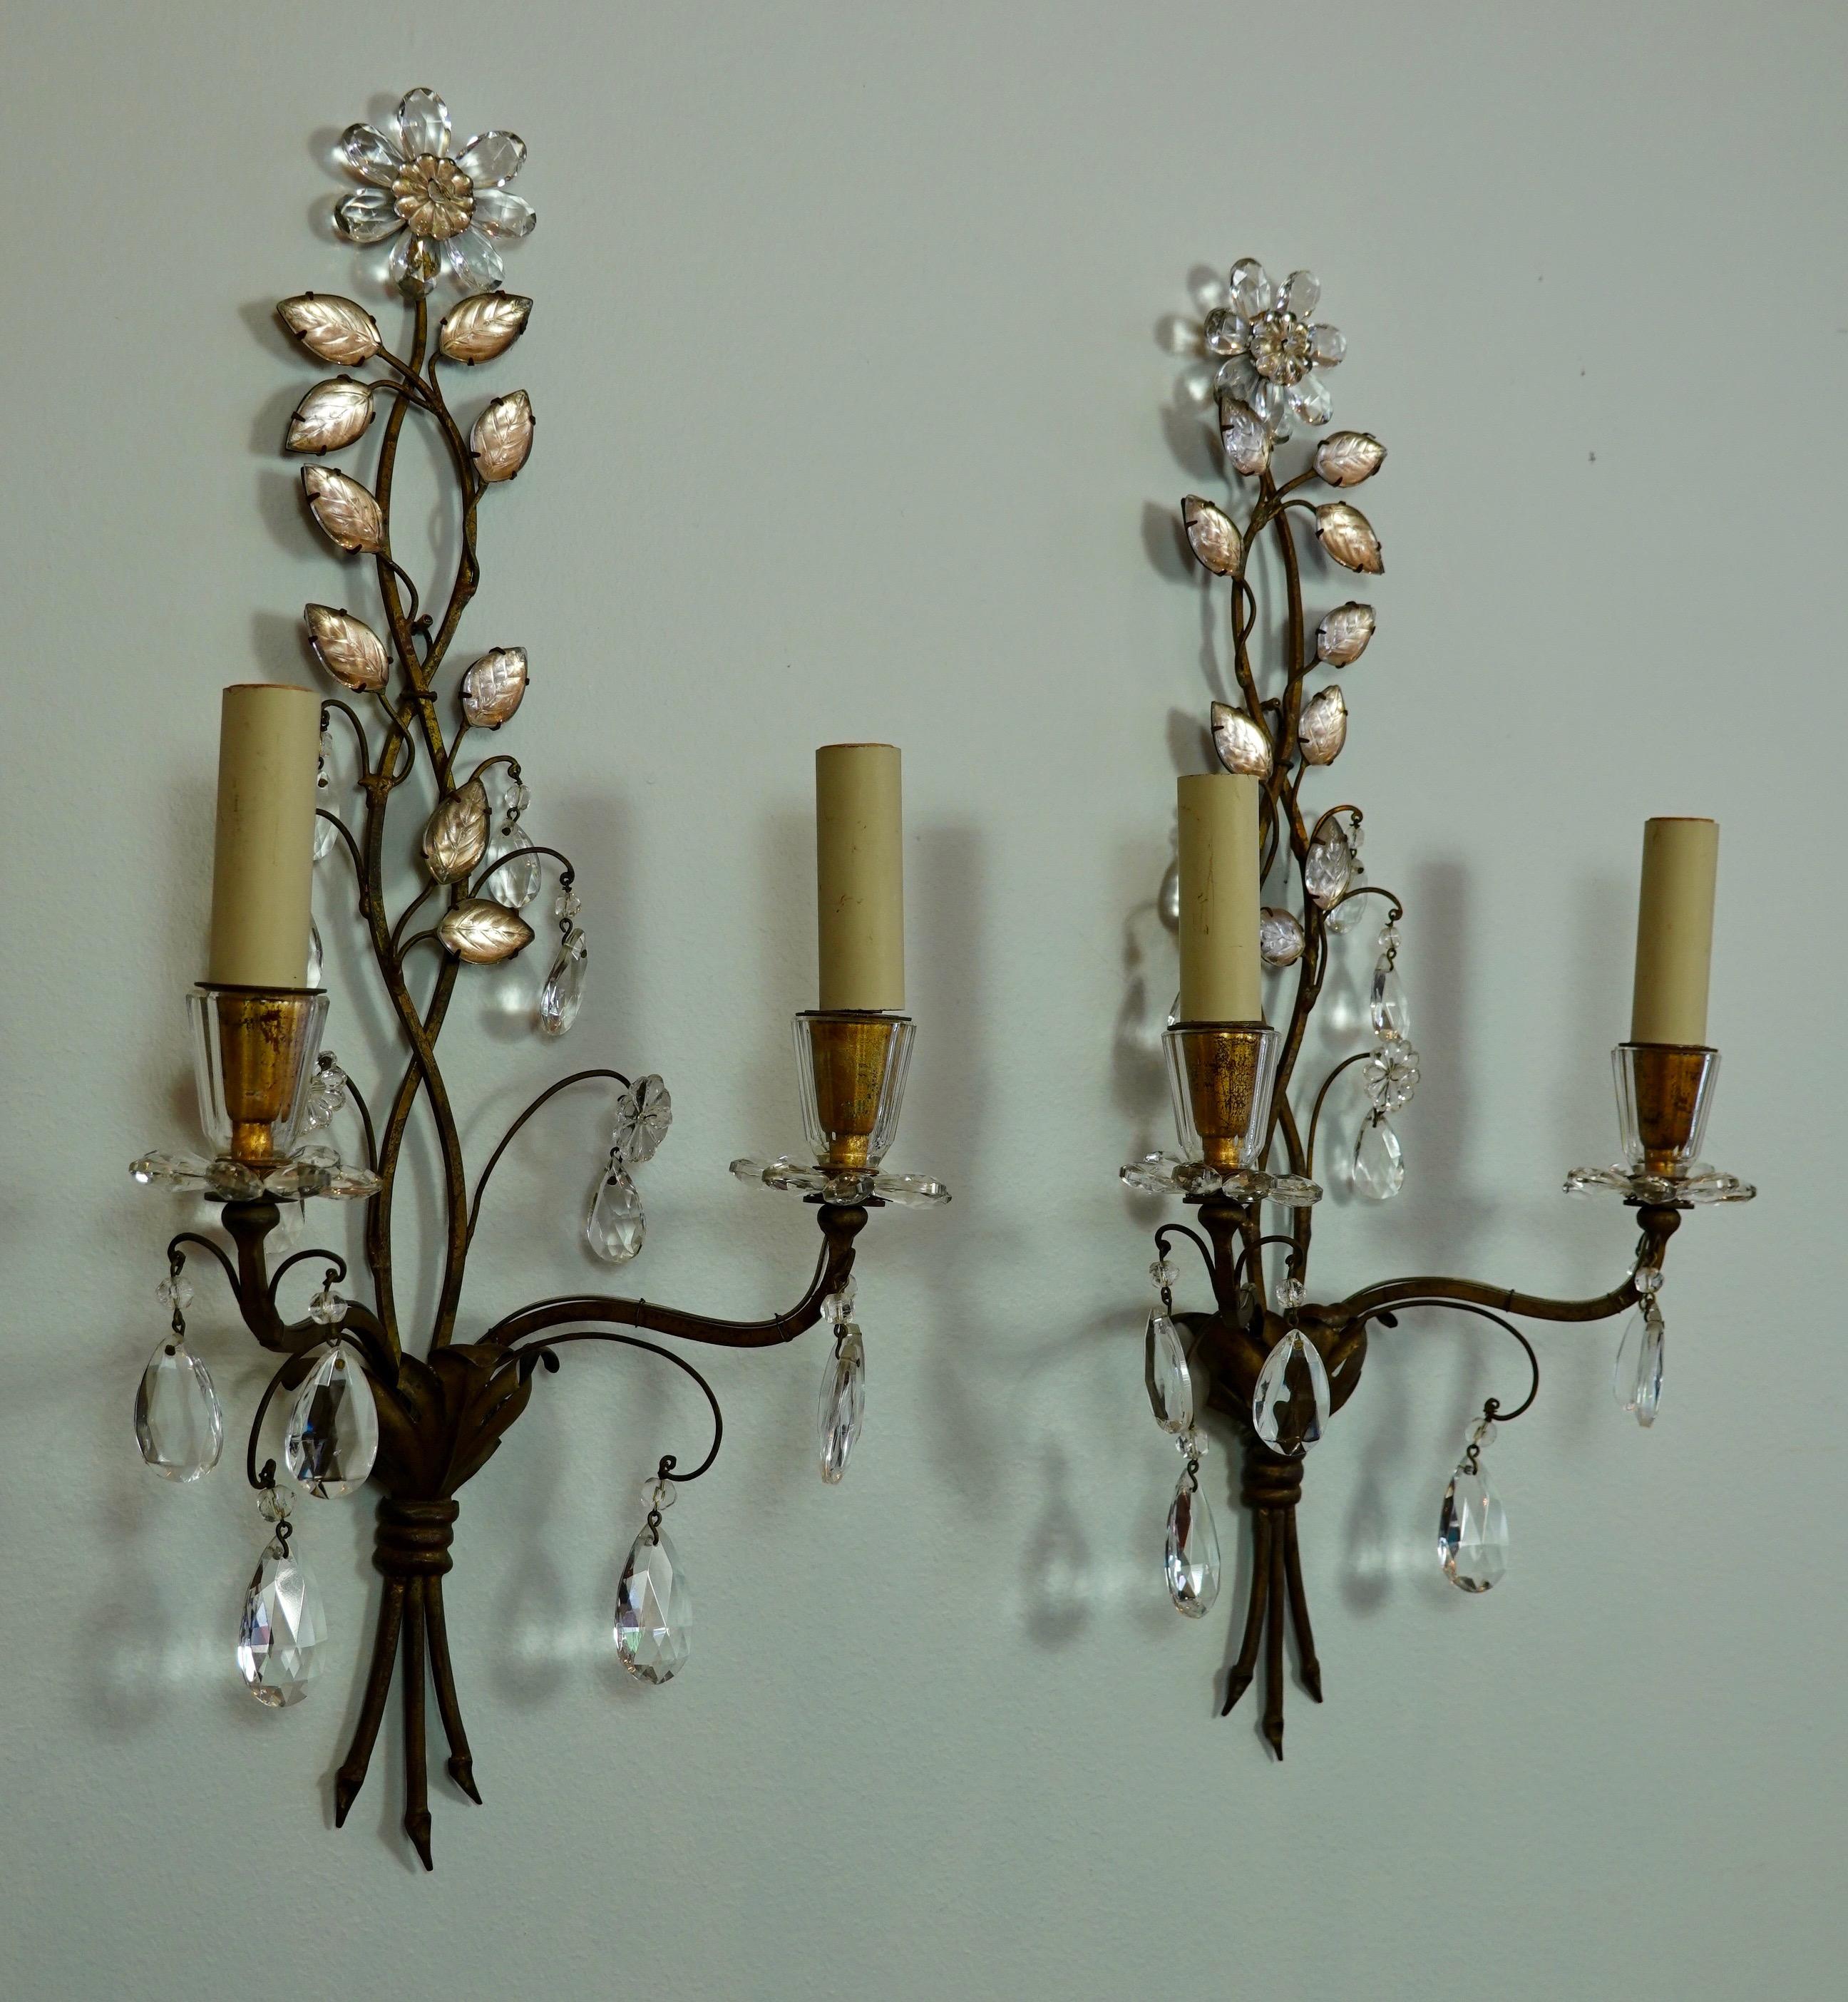 20th Century Pair of French Gilt-Metal and Crystal Leaf Sconces by Maison Baguès For Sale